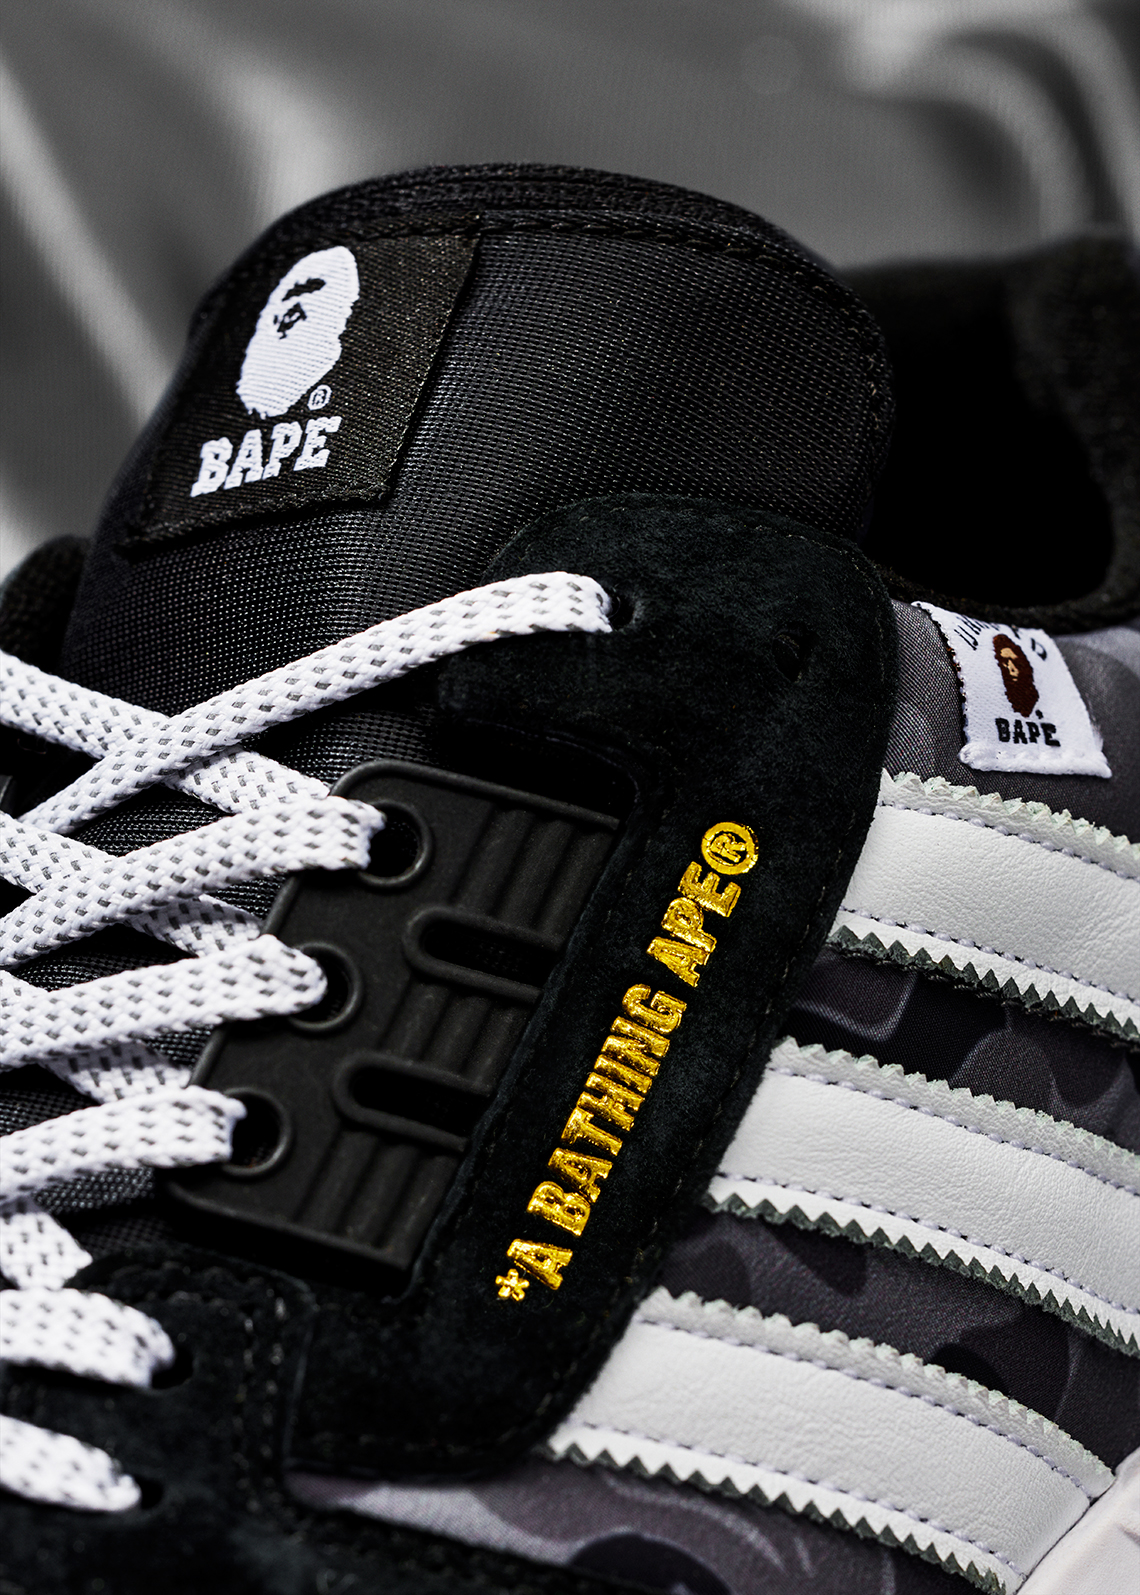 BAPE Undefeated adidas ZX 8000 Release Date | SneakerNews.com